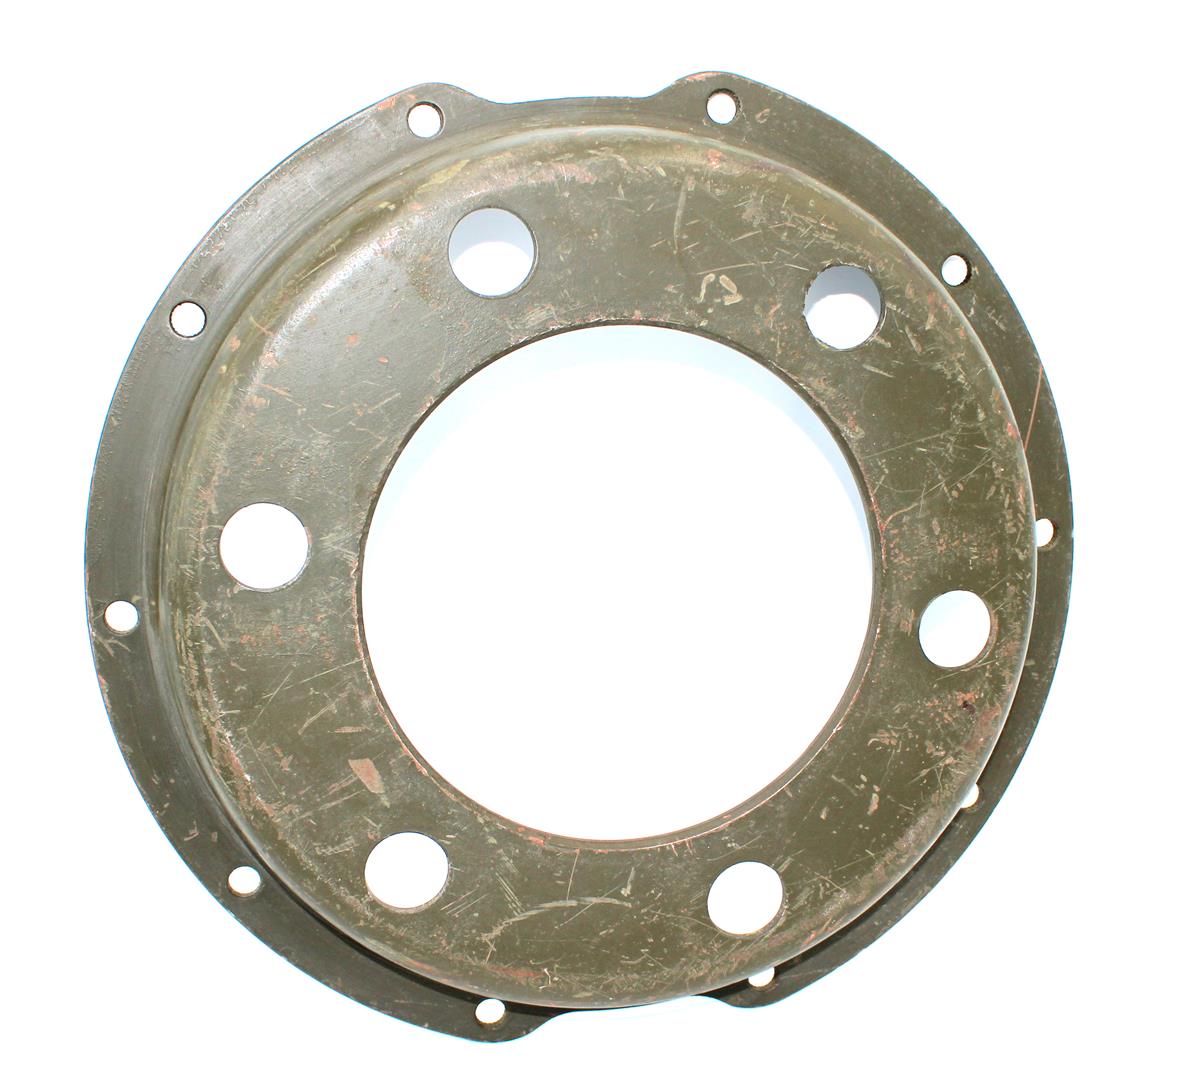 M35-843 | M35-843 Front Brake Drum Adapter Rockwell Steering Axle M35A2 (10).JPG